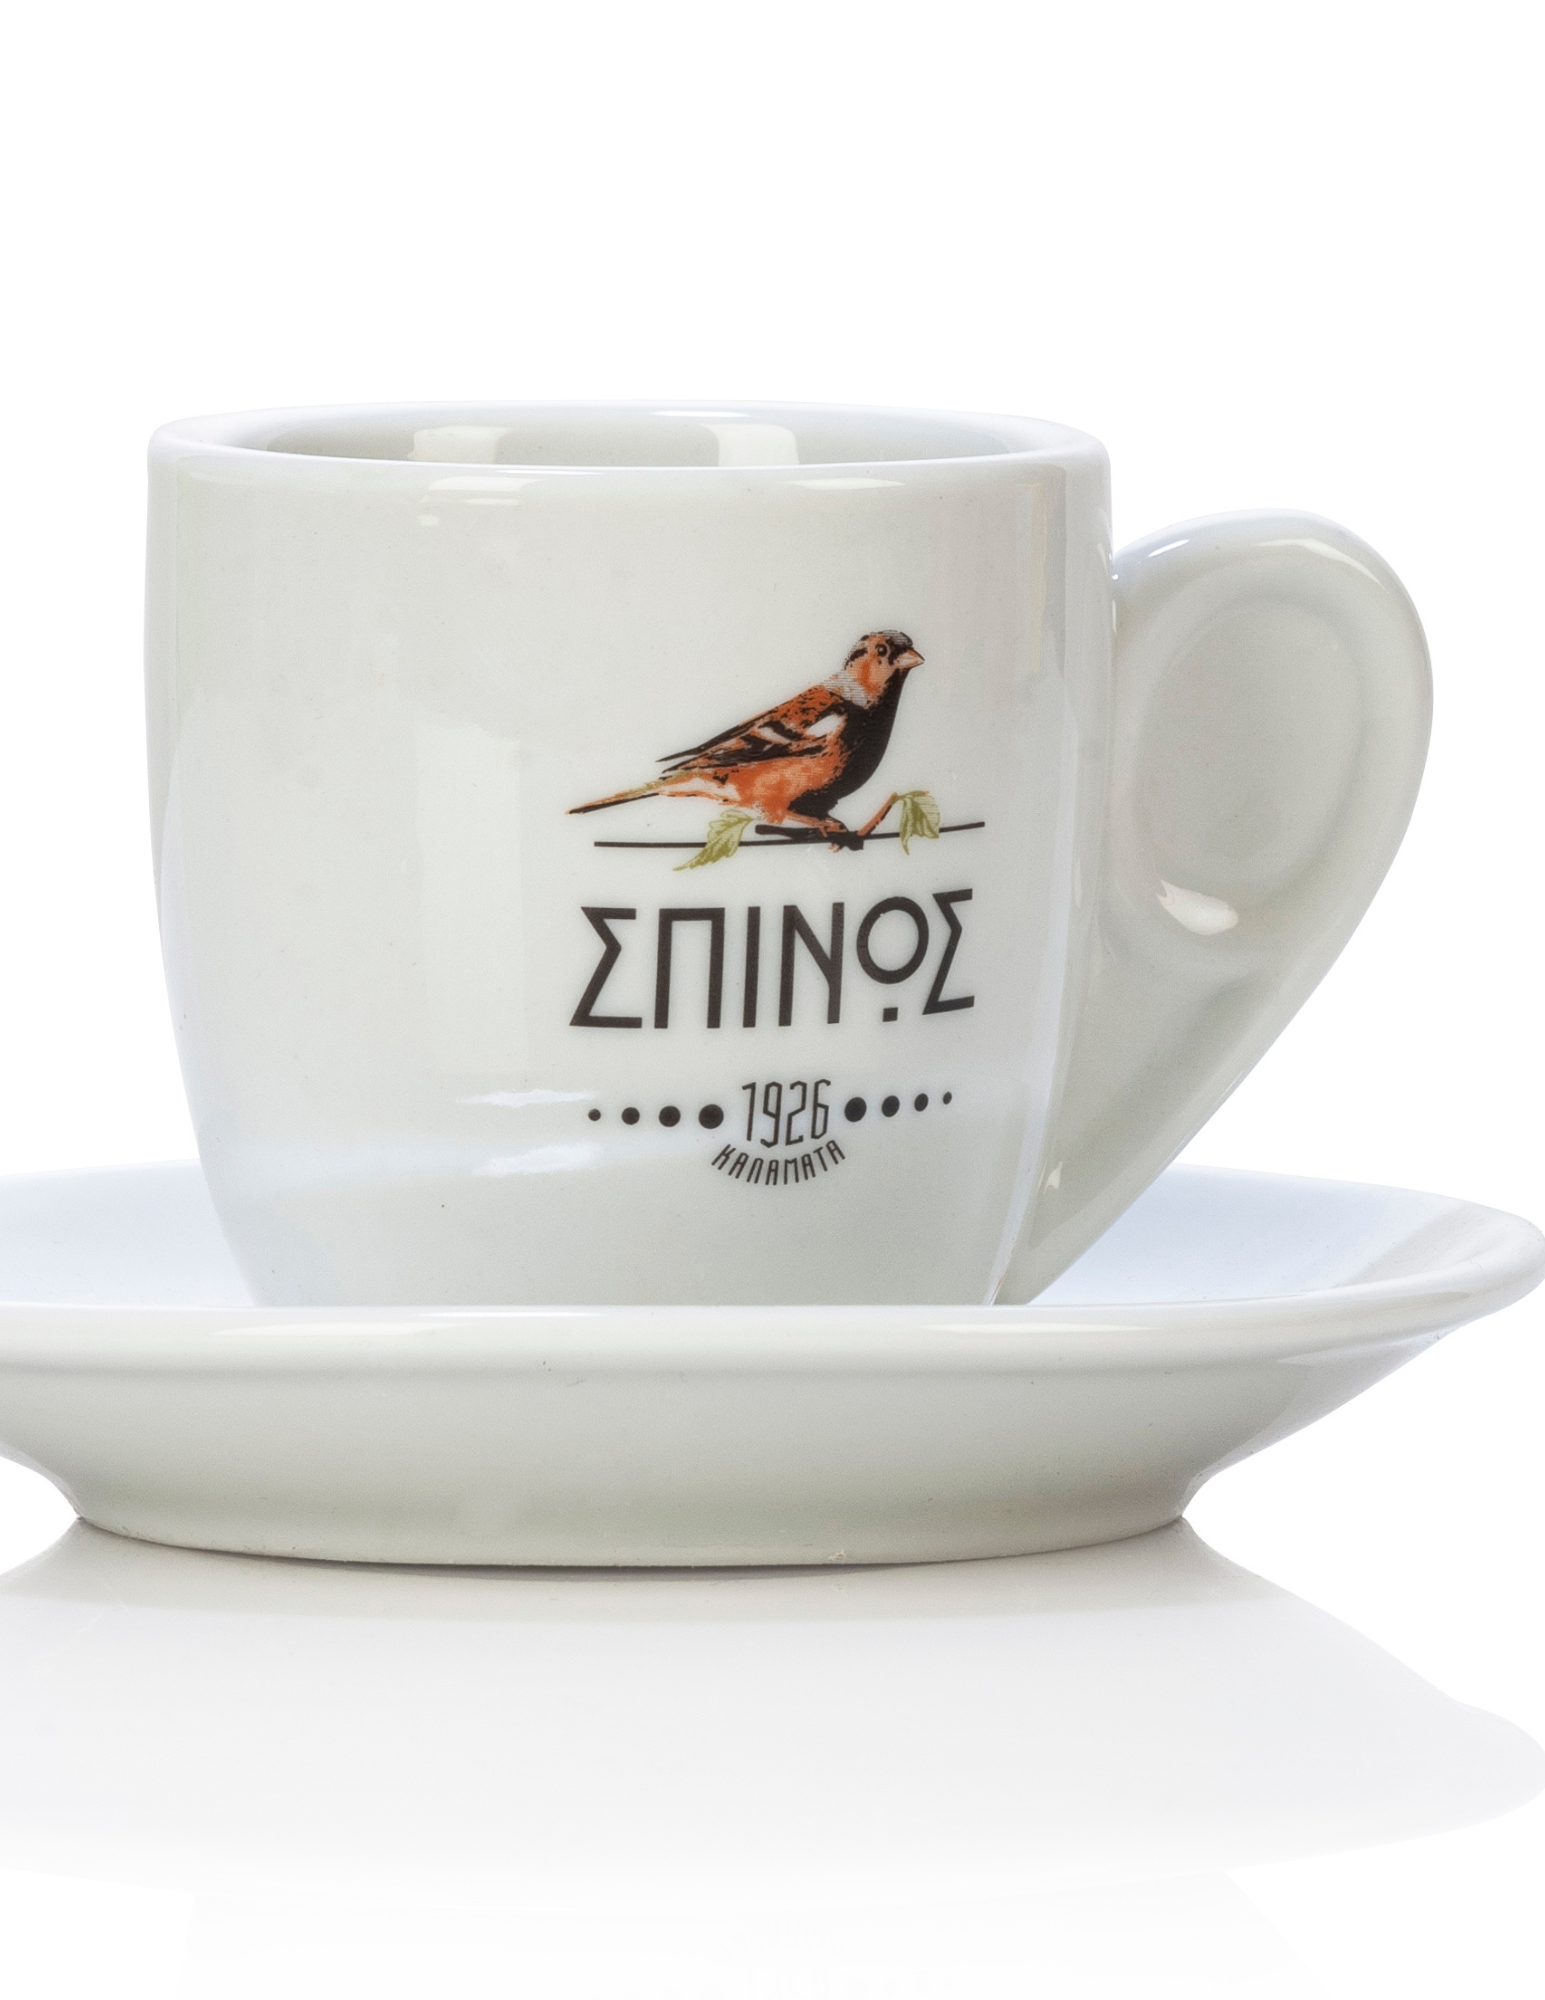 A white espresso cup with the Spinos name and logo printed on the side